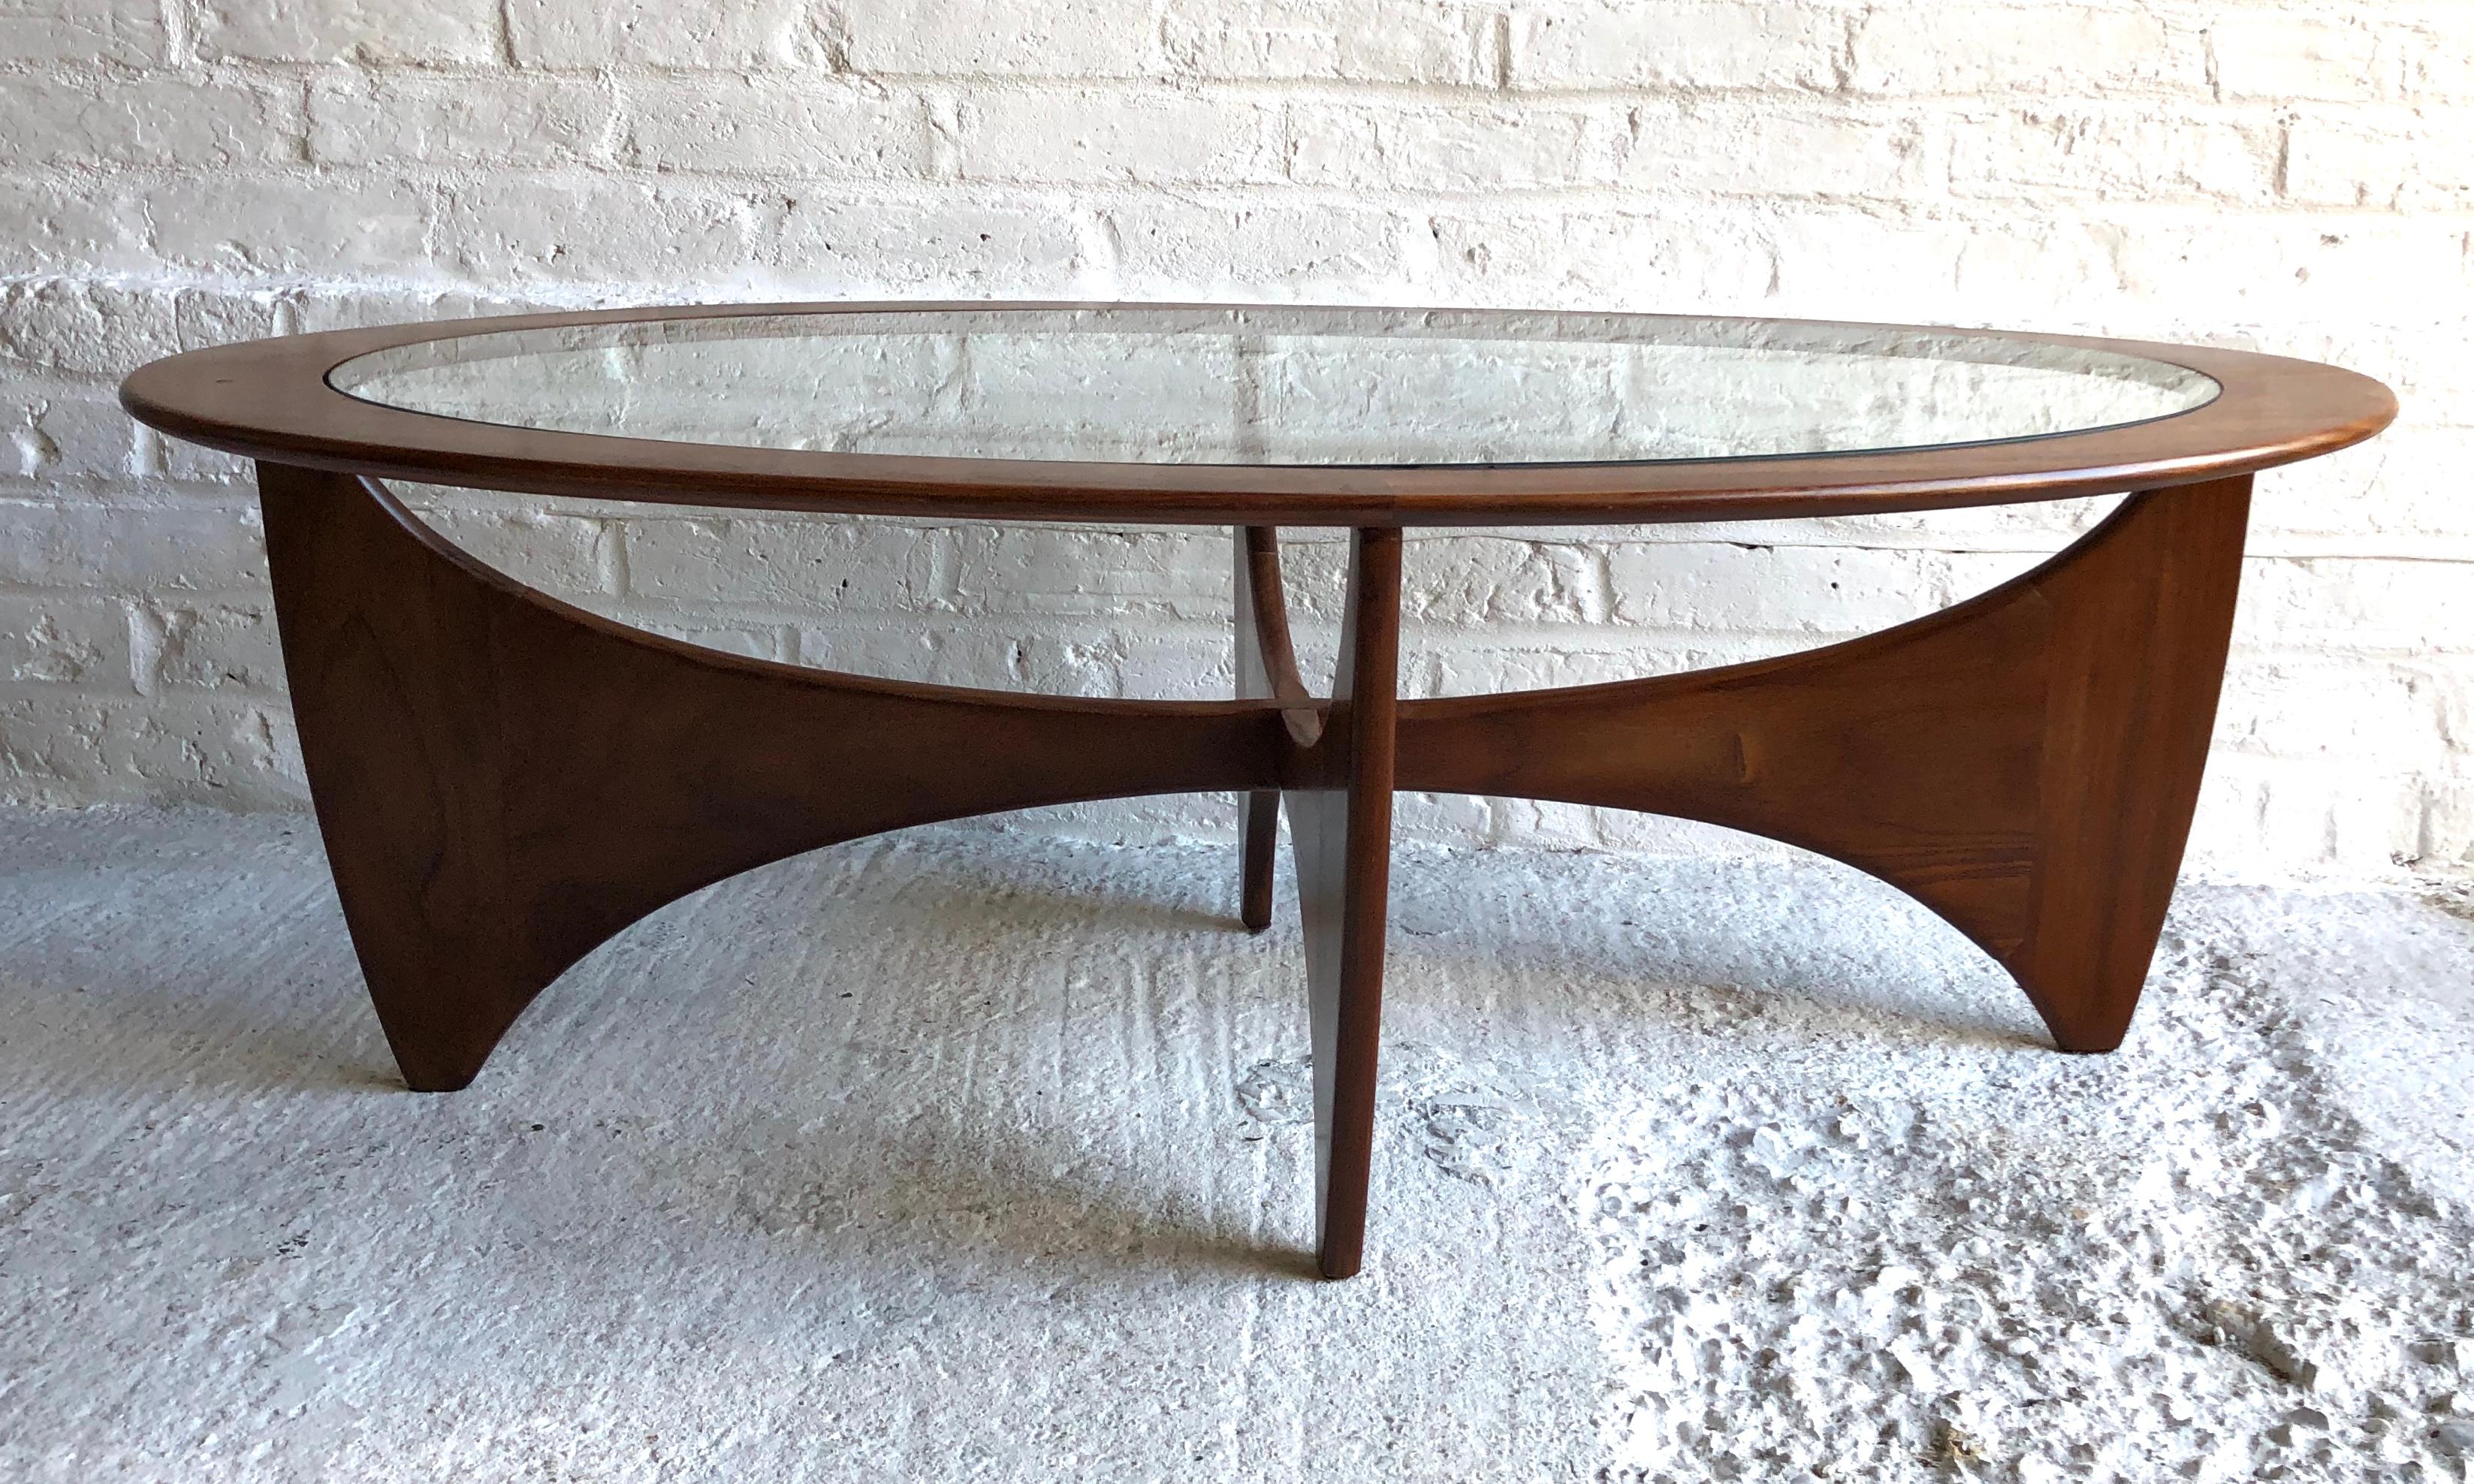 Midcentury oval Astro teak coffee table with glass top by G-Plan, 1960s
A beautiful sculptural coffee table designed by Victor Wilkins and manufactured by G Plan during the 1960s in England.
In great condition, table has recently been restored and